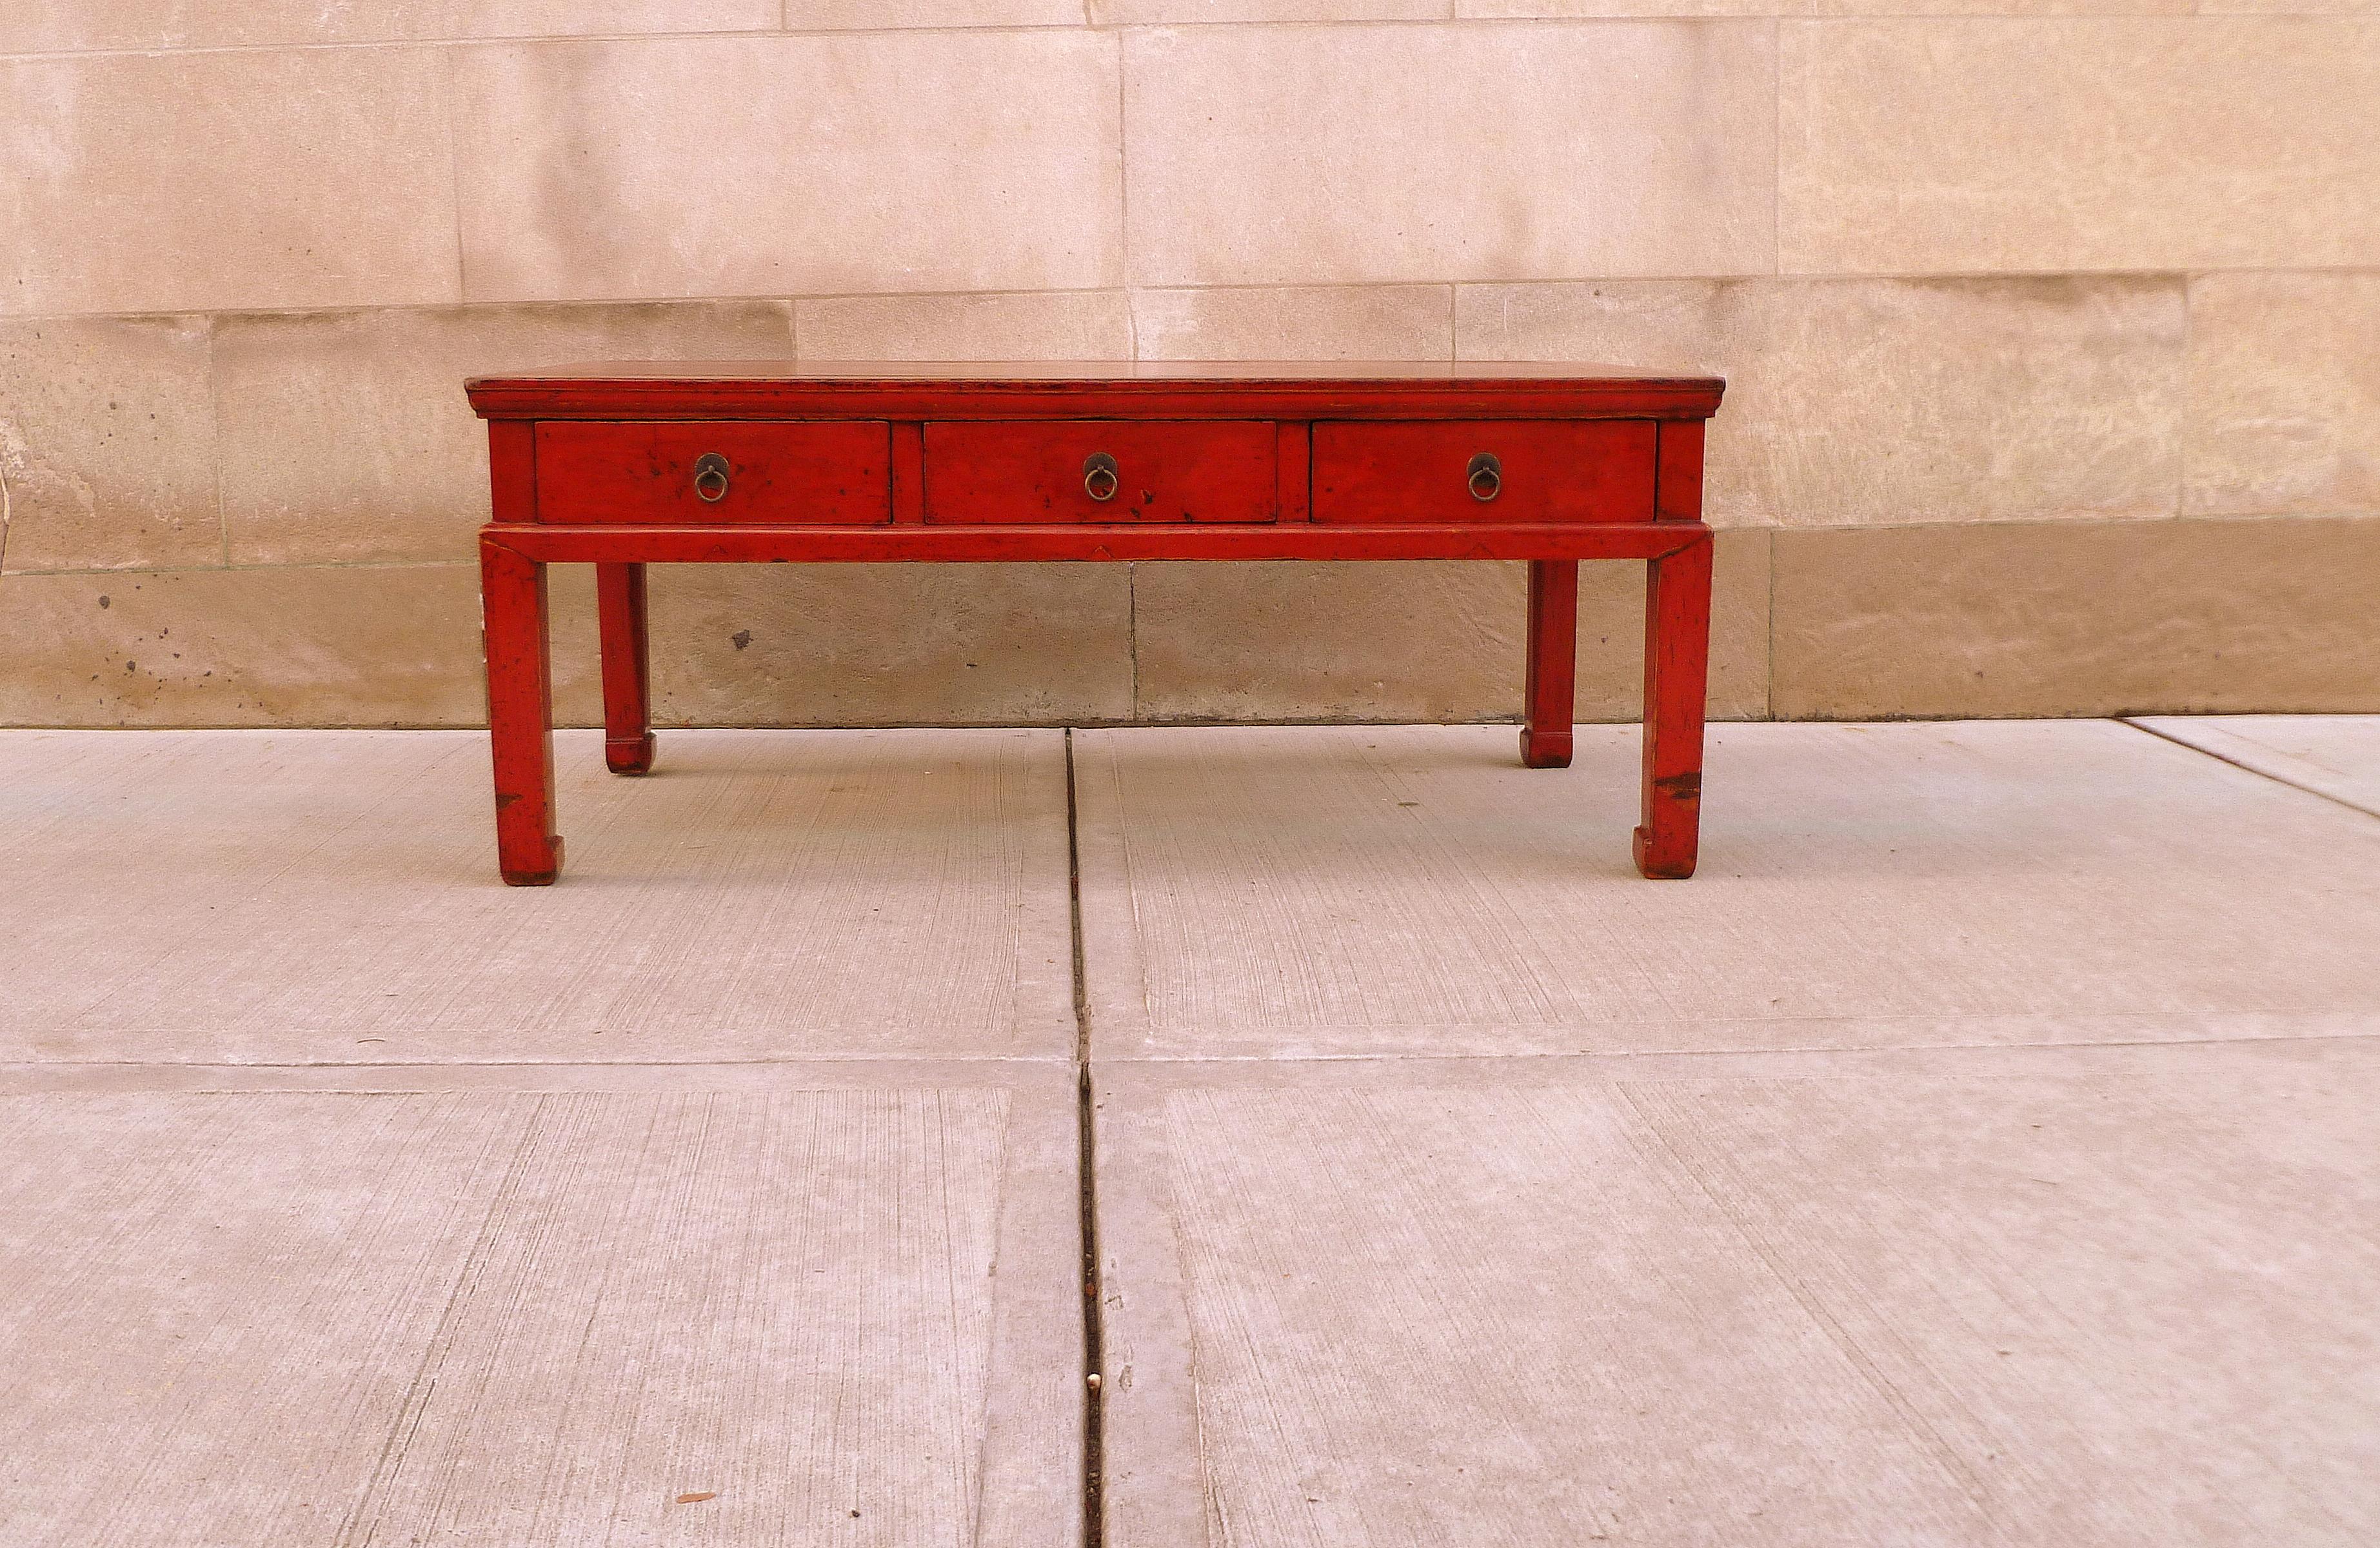 Antiques red lacquer low table with three drawers with brass pulls and straight legs with hoof feet.